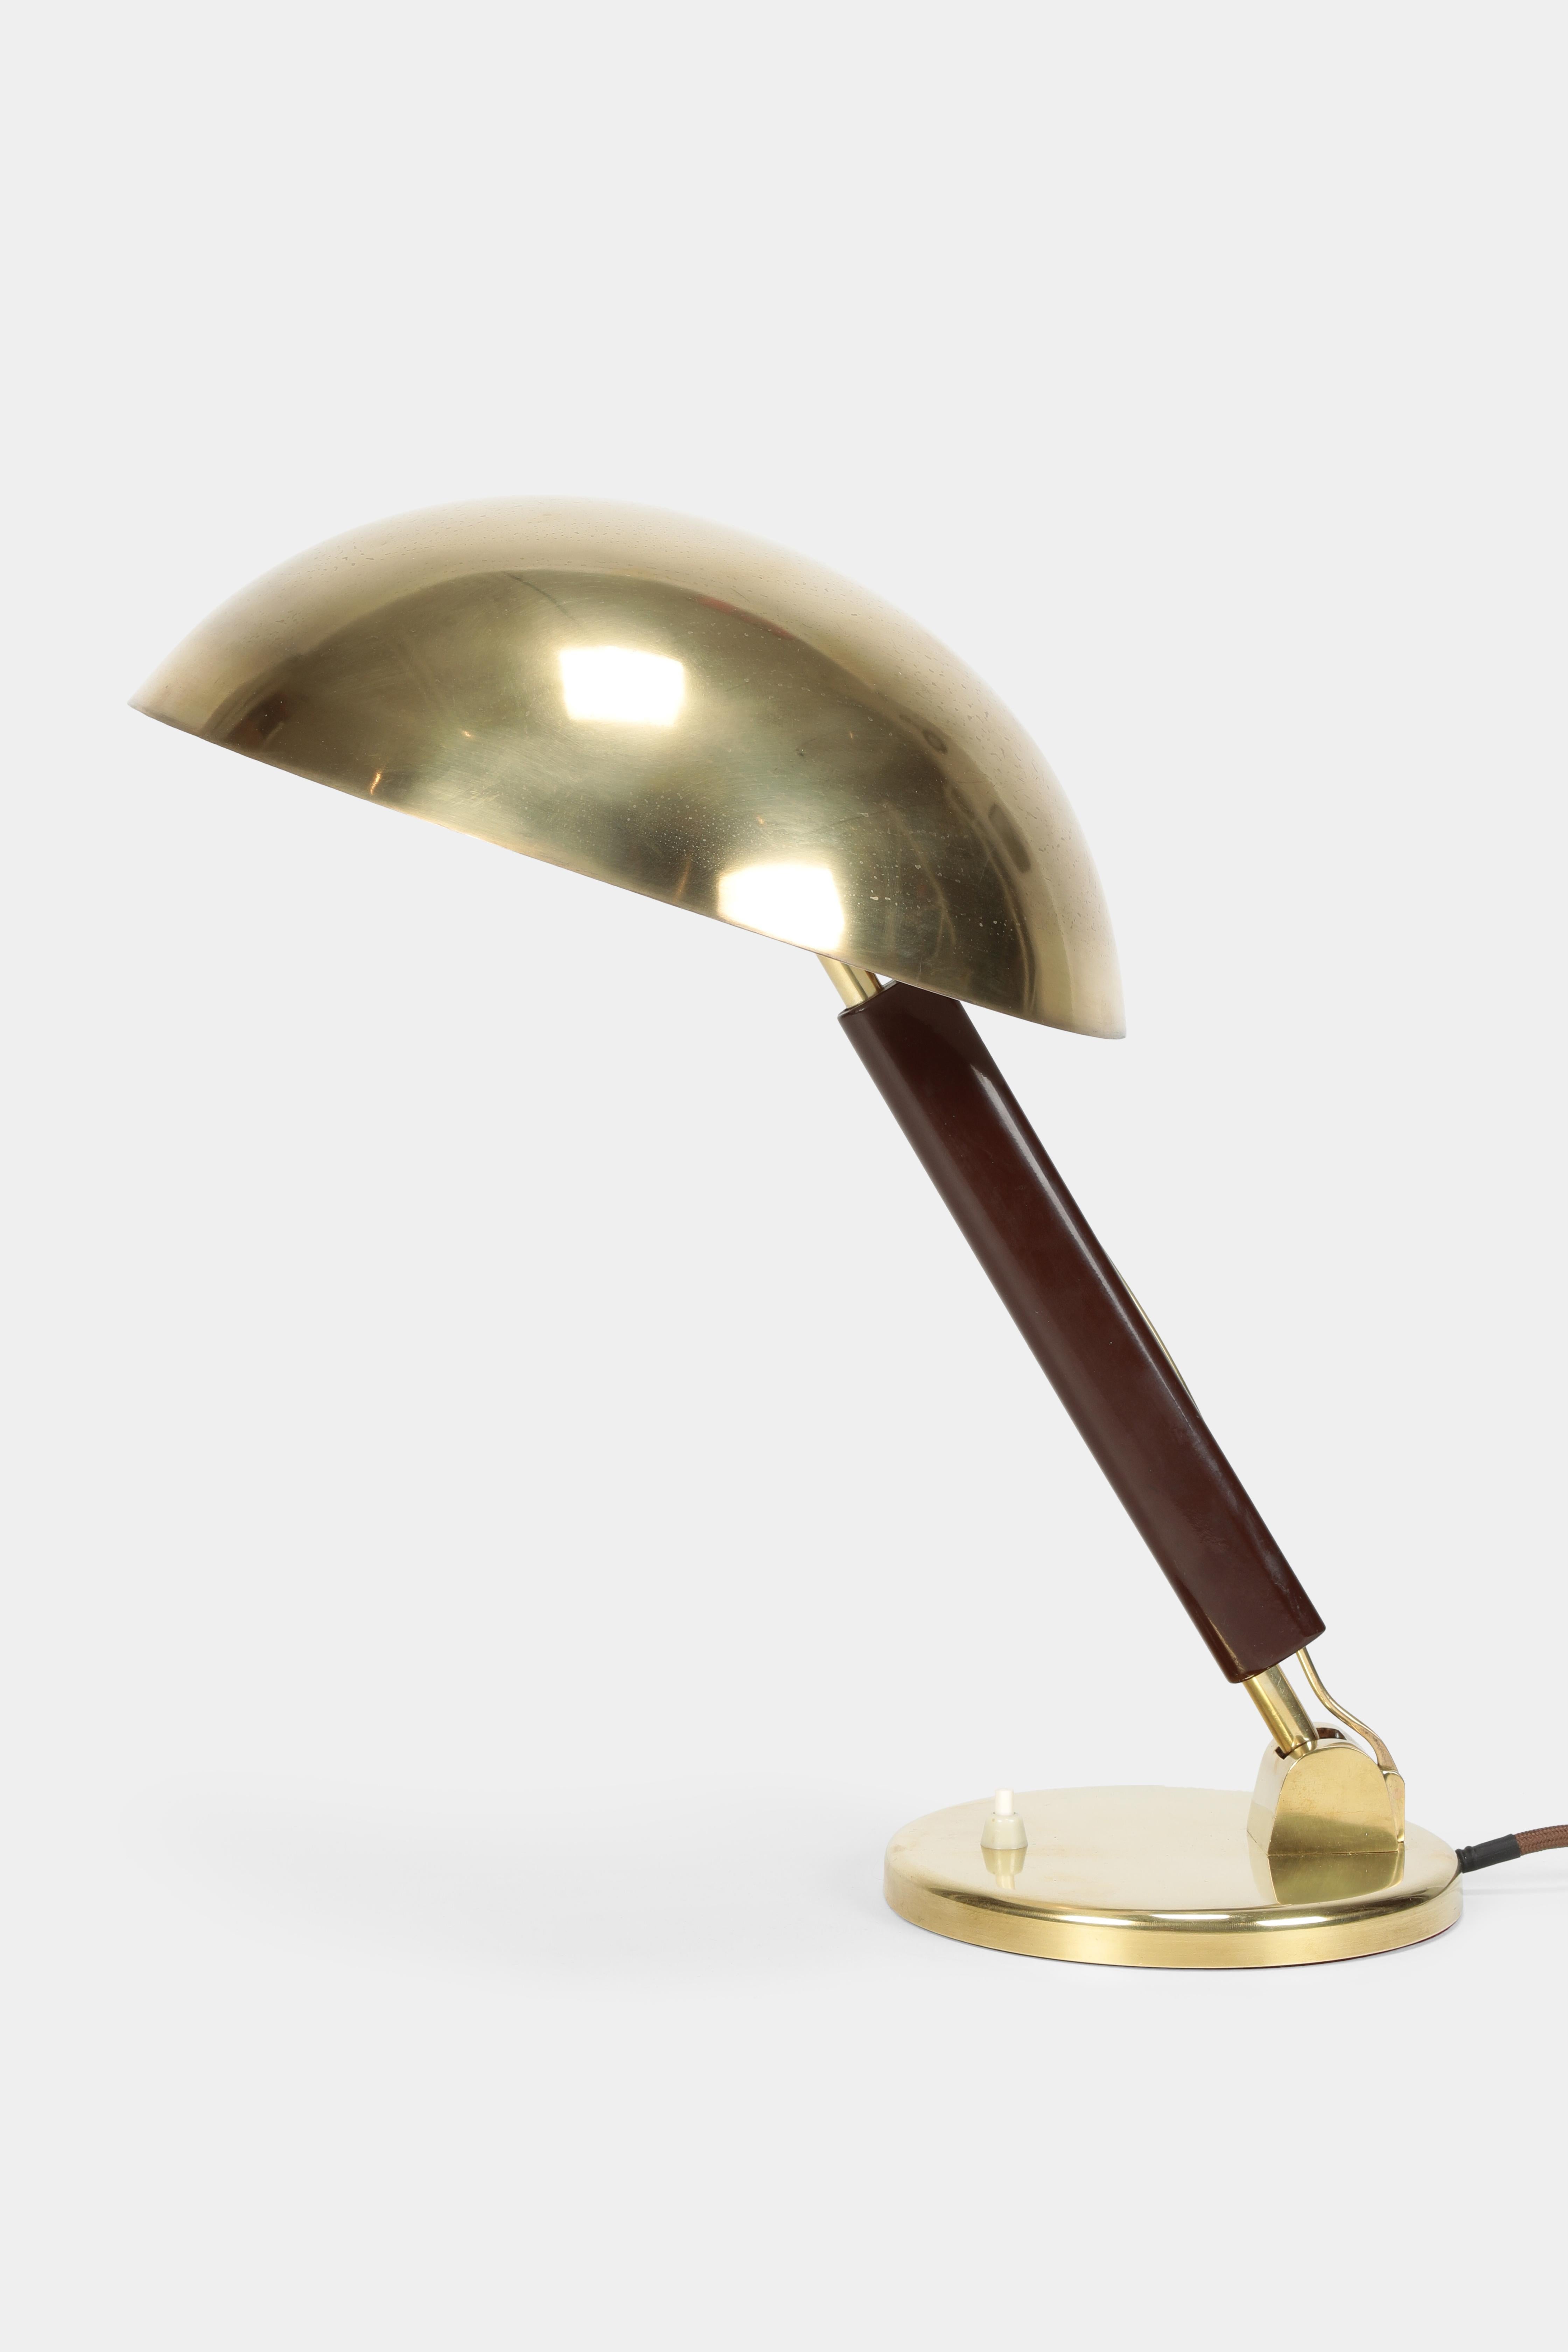 Karl Trabert Table Lamp G. Schanzenbach, 1930s In Good Condition For Sale In Basel, CH